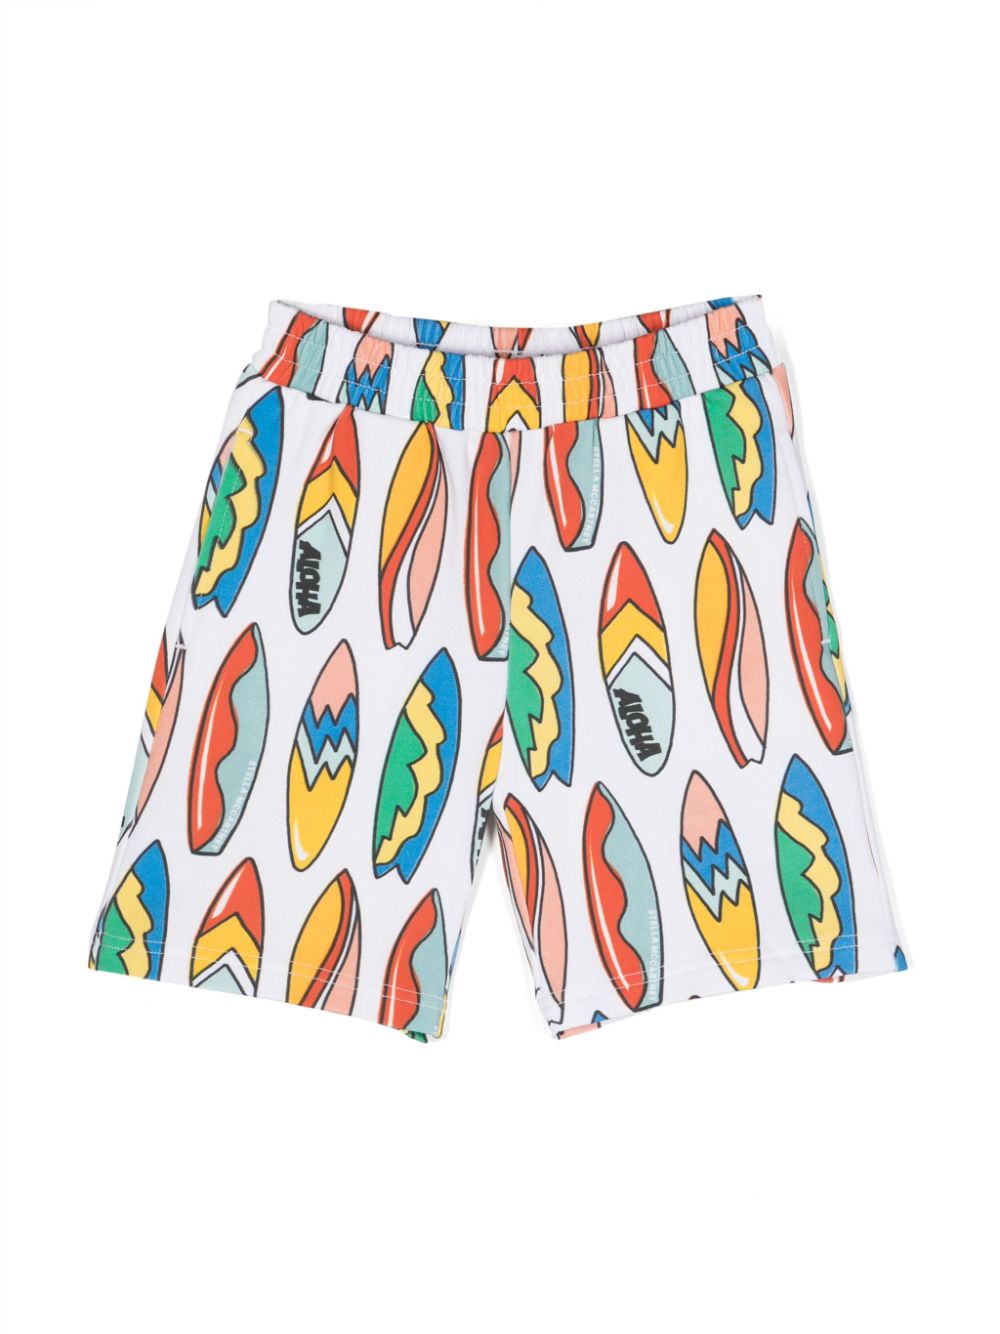 White Bermuda shorts for boys with multicolored print